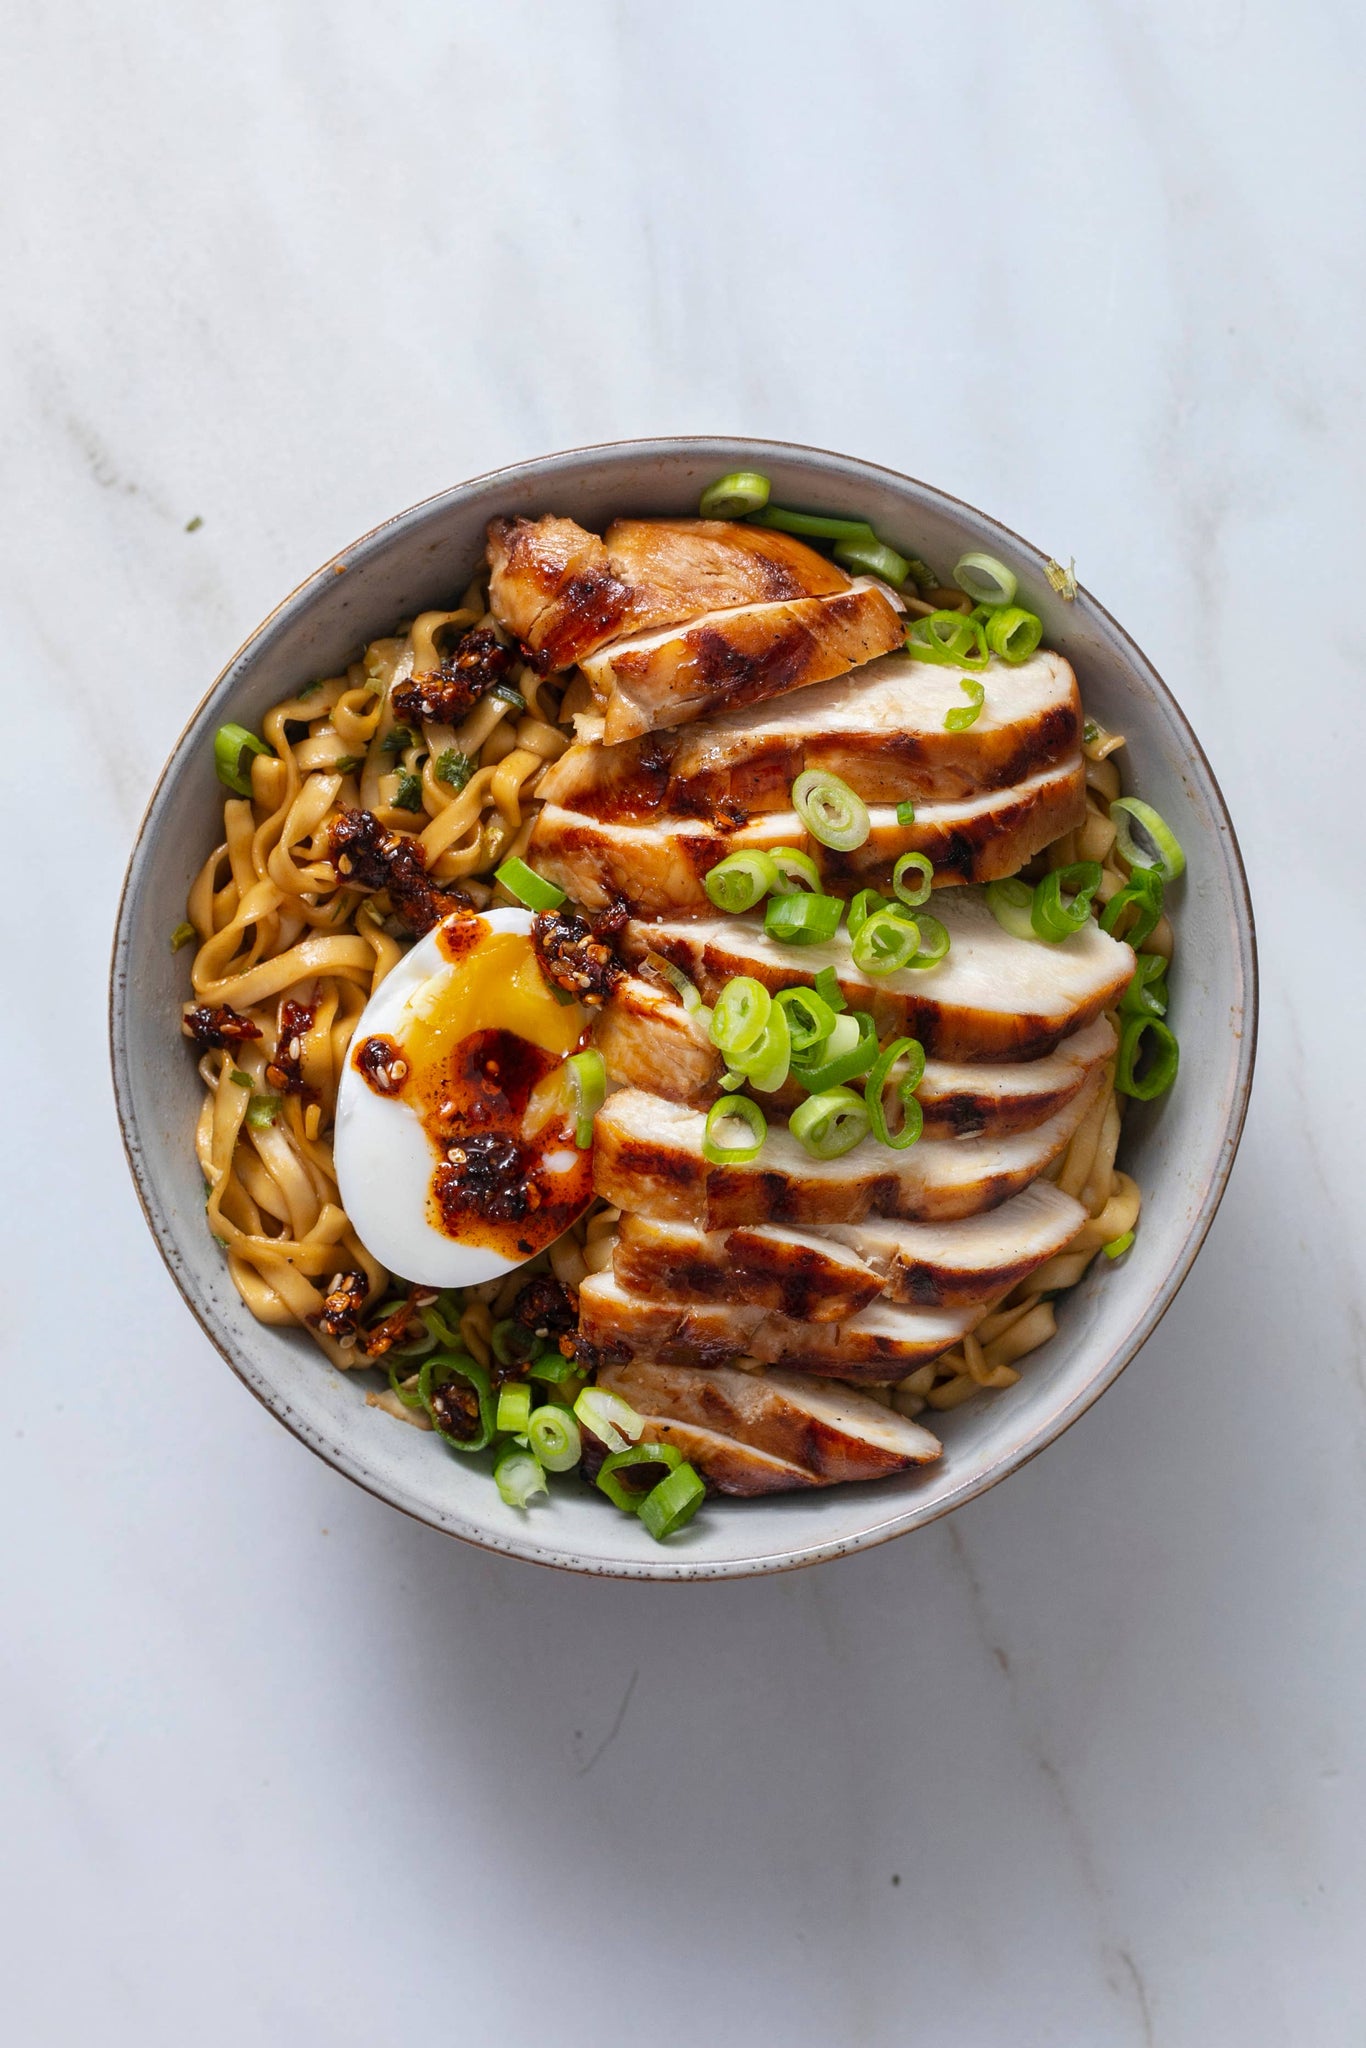 Spicy Soy Noodles